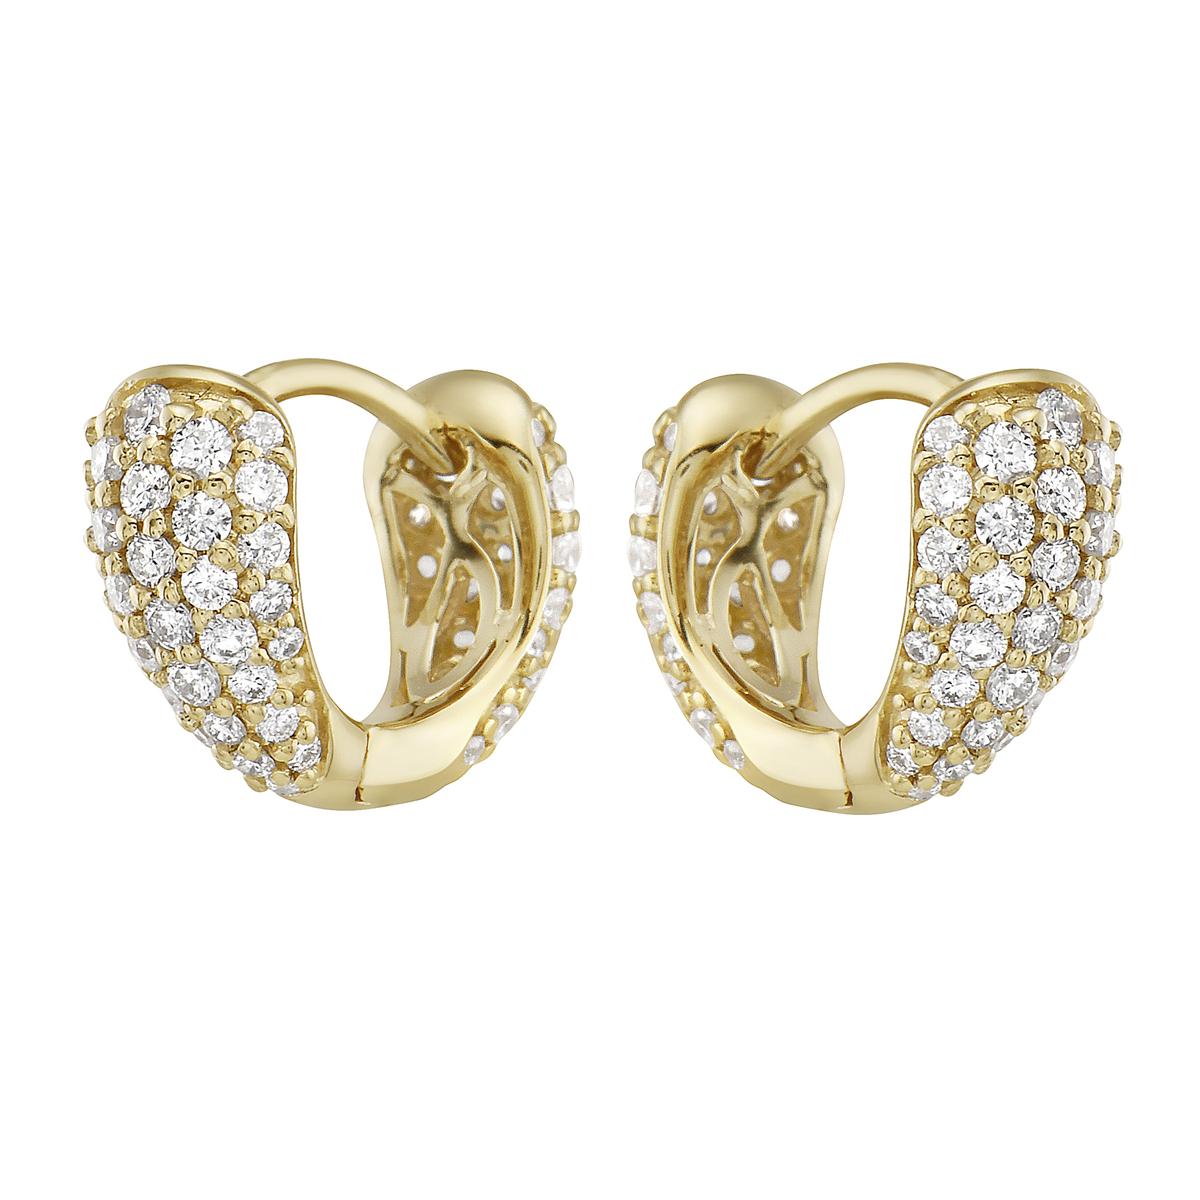 With these exquisite yellow-gold diamond huggies, style and glamour are in the spotlight. These huggies are set in 14-carat gold, made out of 1.9 grams of gold. The color of the diamonds is GH. The clarity is SI1-OSI2. These earrings are made out of